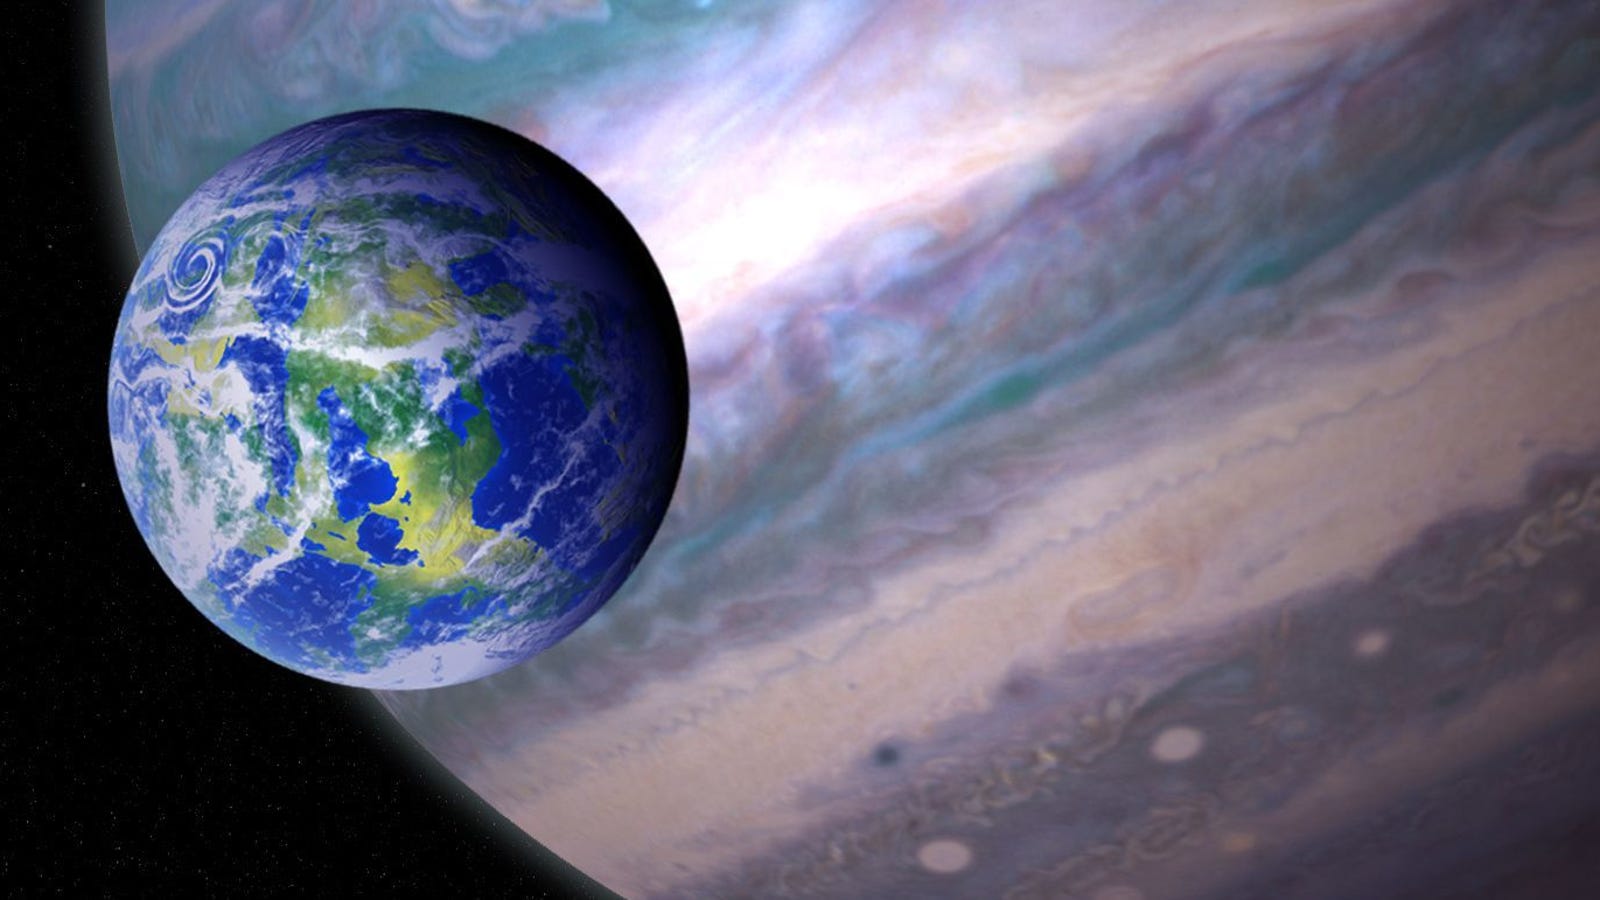 Our Galaxy Might Be Teeming With Habitable Exomoons